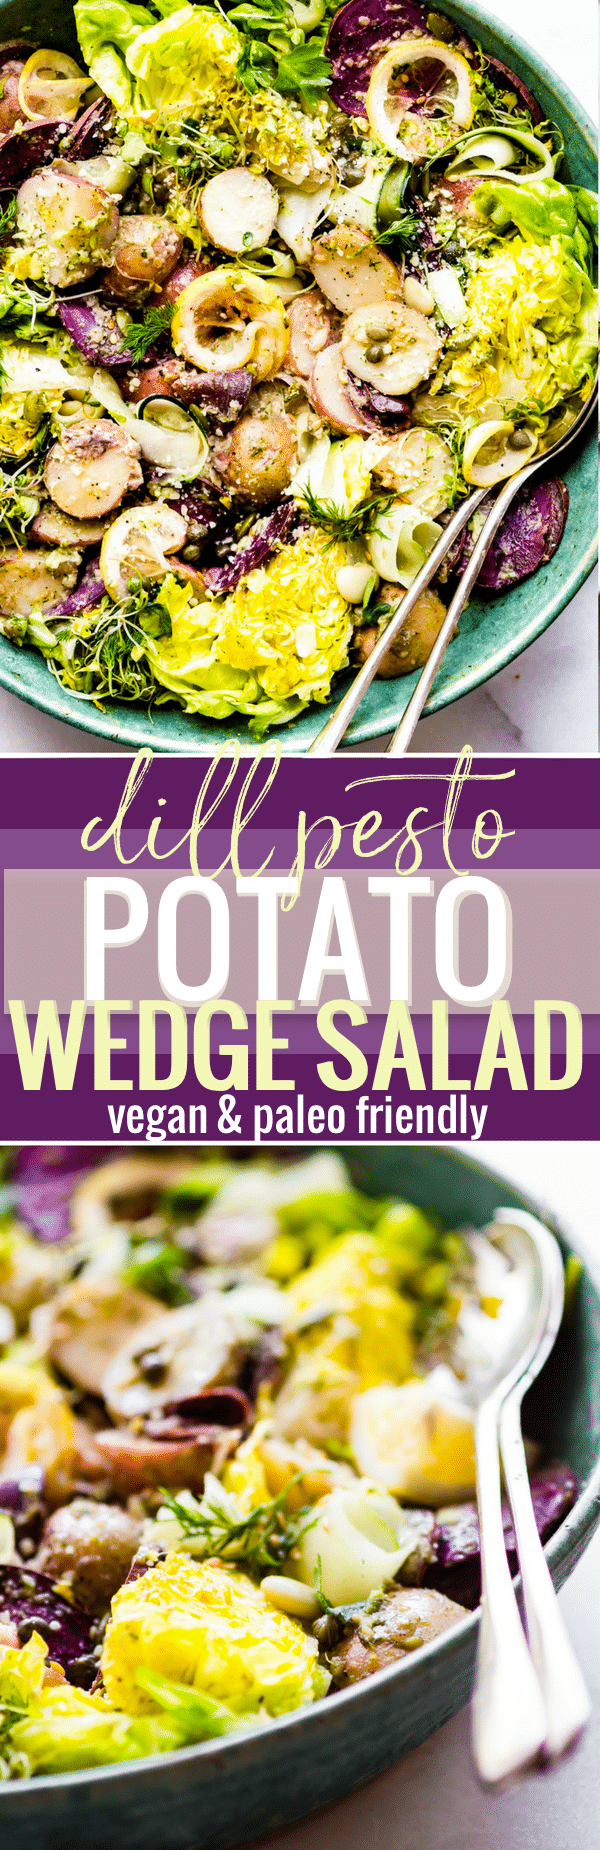 Dill Pesto Potato Wedge Salad makes a healthy side dish for your next barbecue! A crunchy wedge salad and vegan potato salad tossed a homemade dill pesto. www.cottercrunch.com